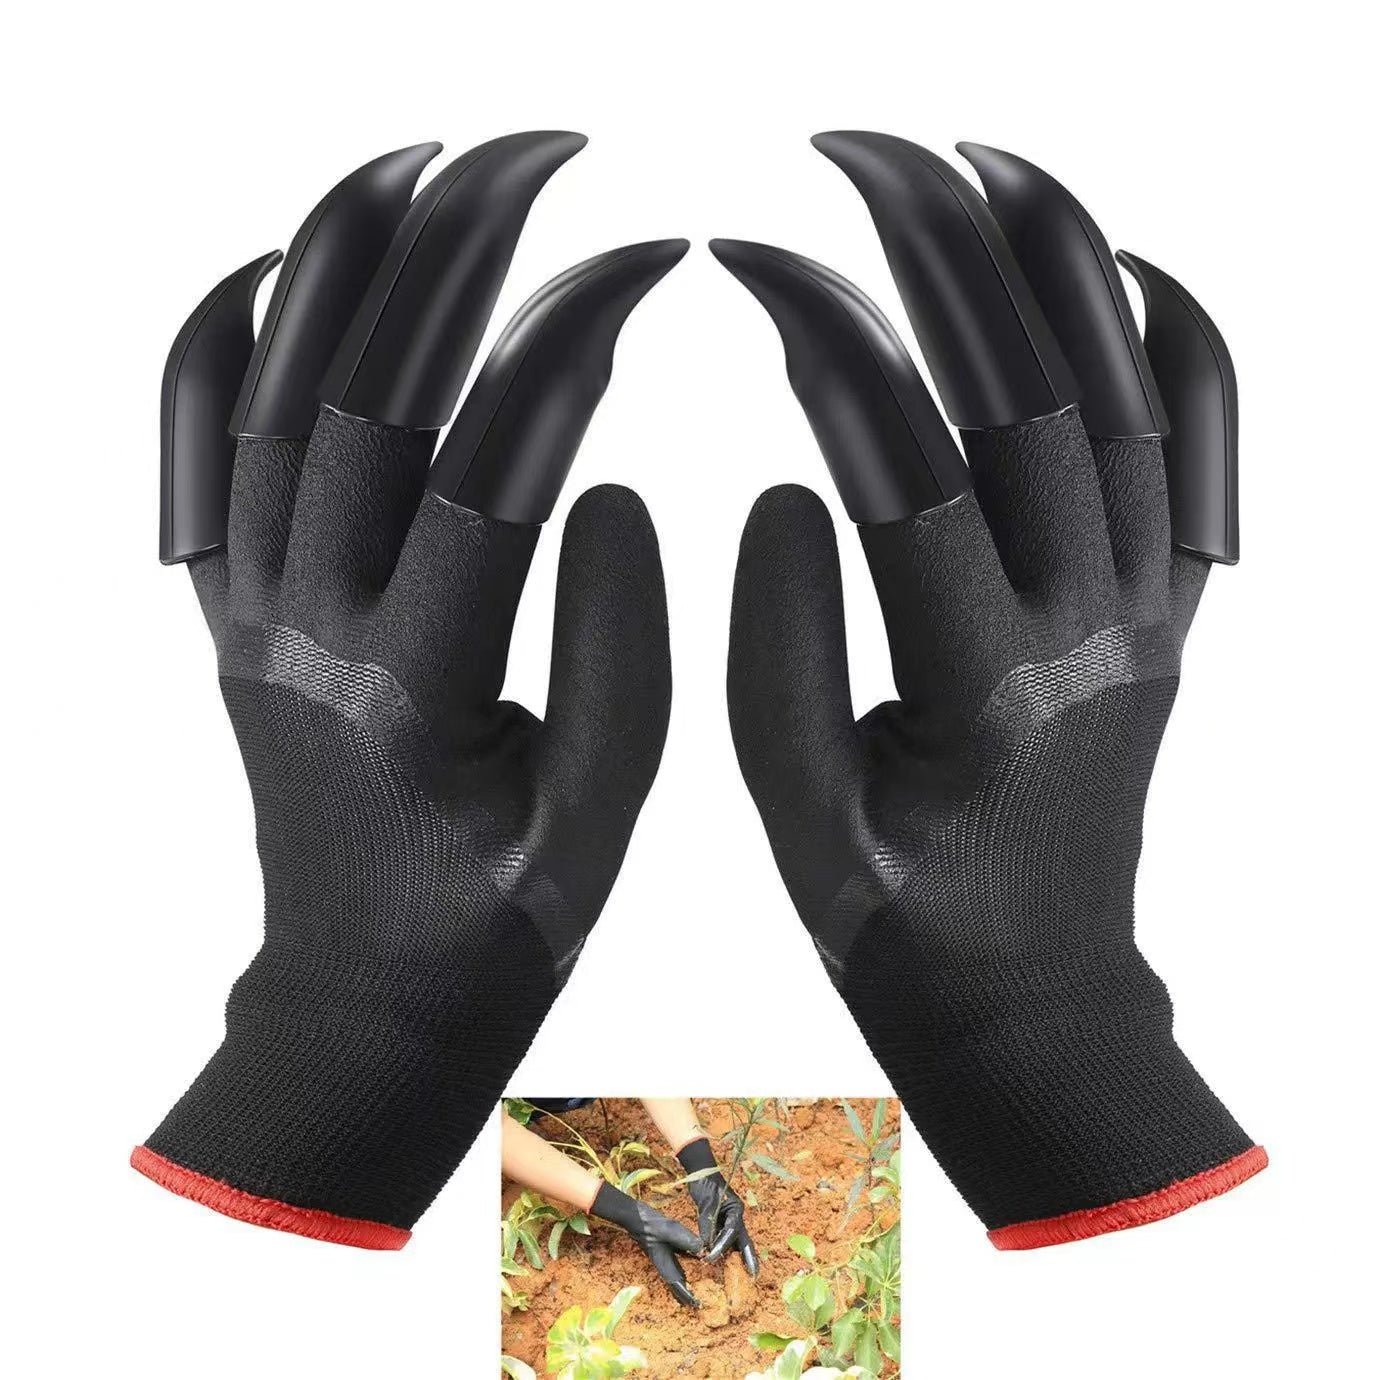 Digging Claw Gloves